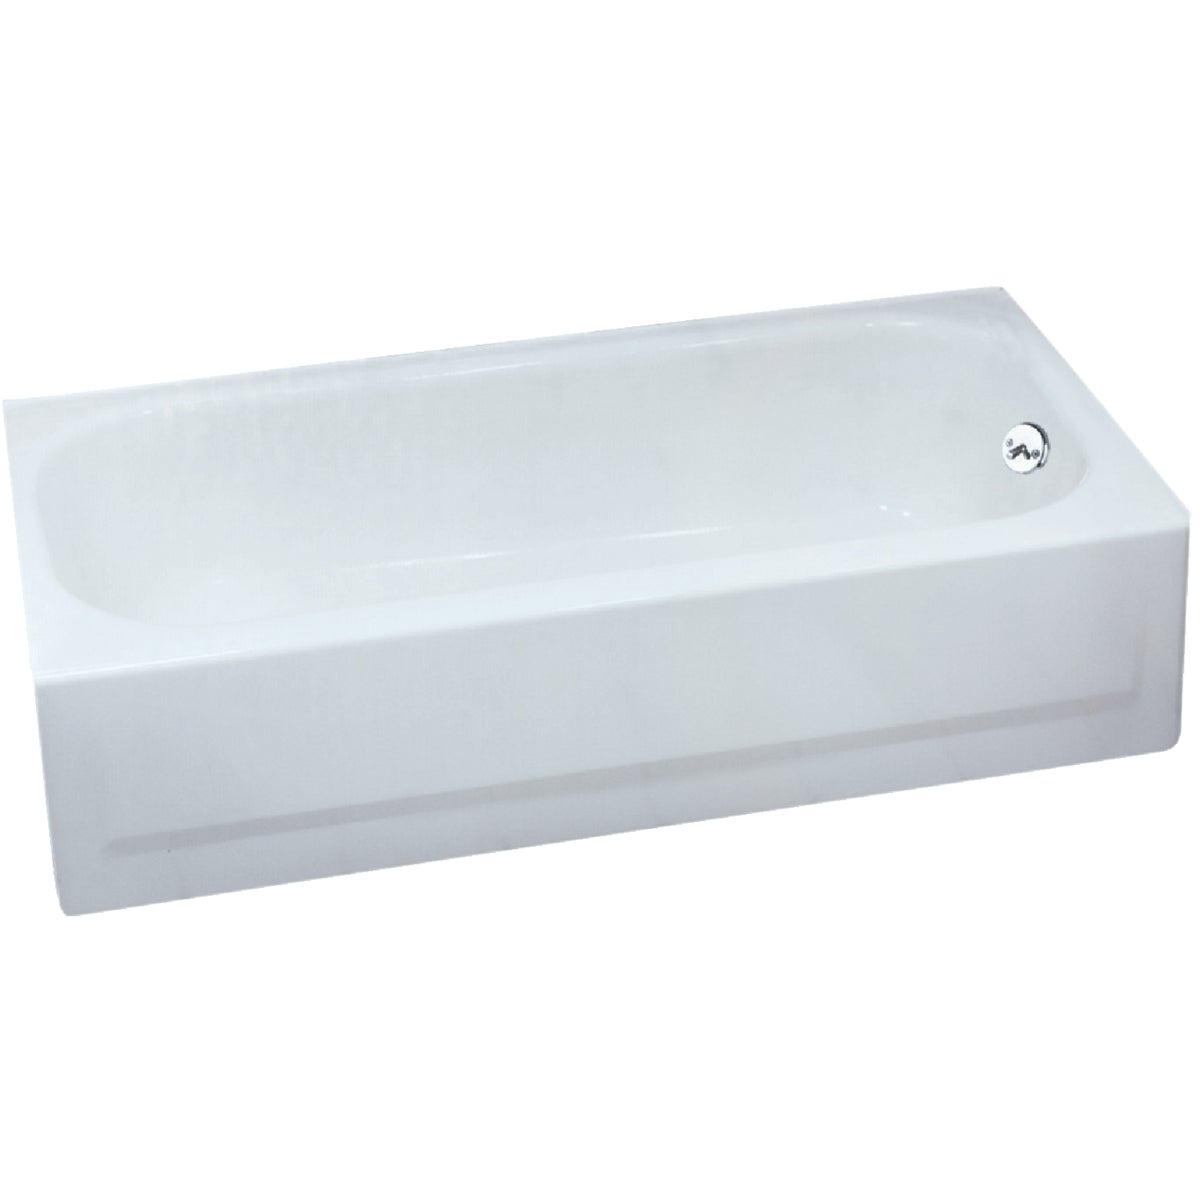 Item 478962, The Aloha is a 60 x 30 x 14 1/4bathtub  the industries #1 selling porcelain